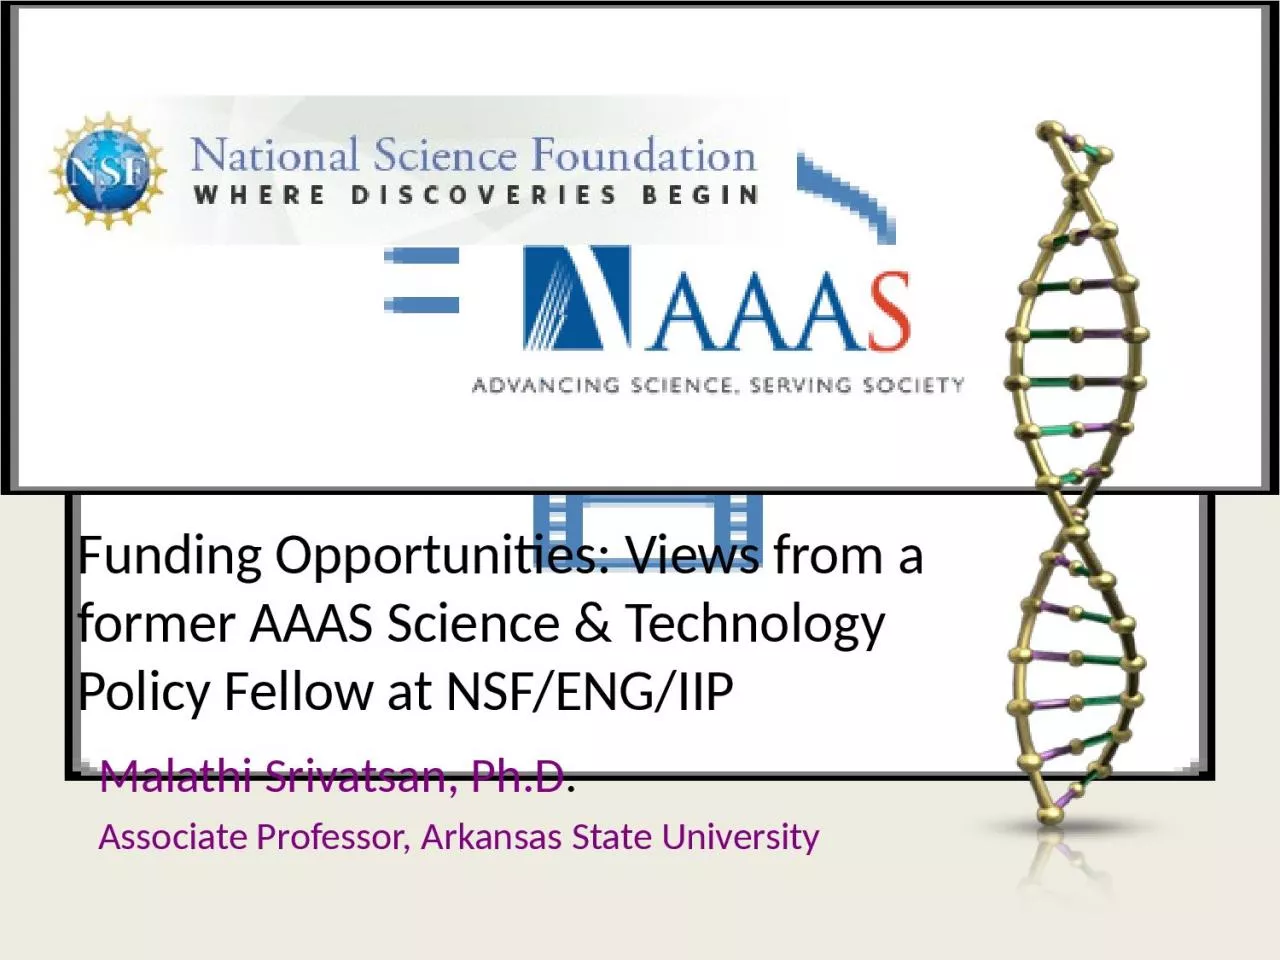 Funding Opportunities: Views from a former AAAS Science & Technology Policy Fellow